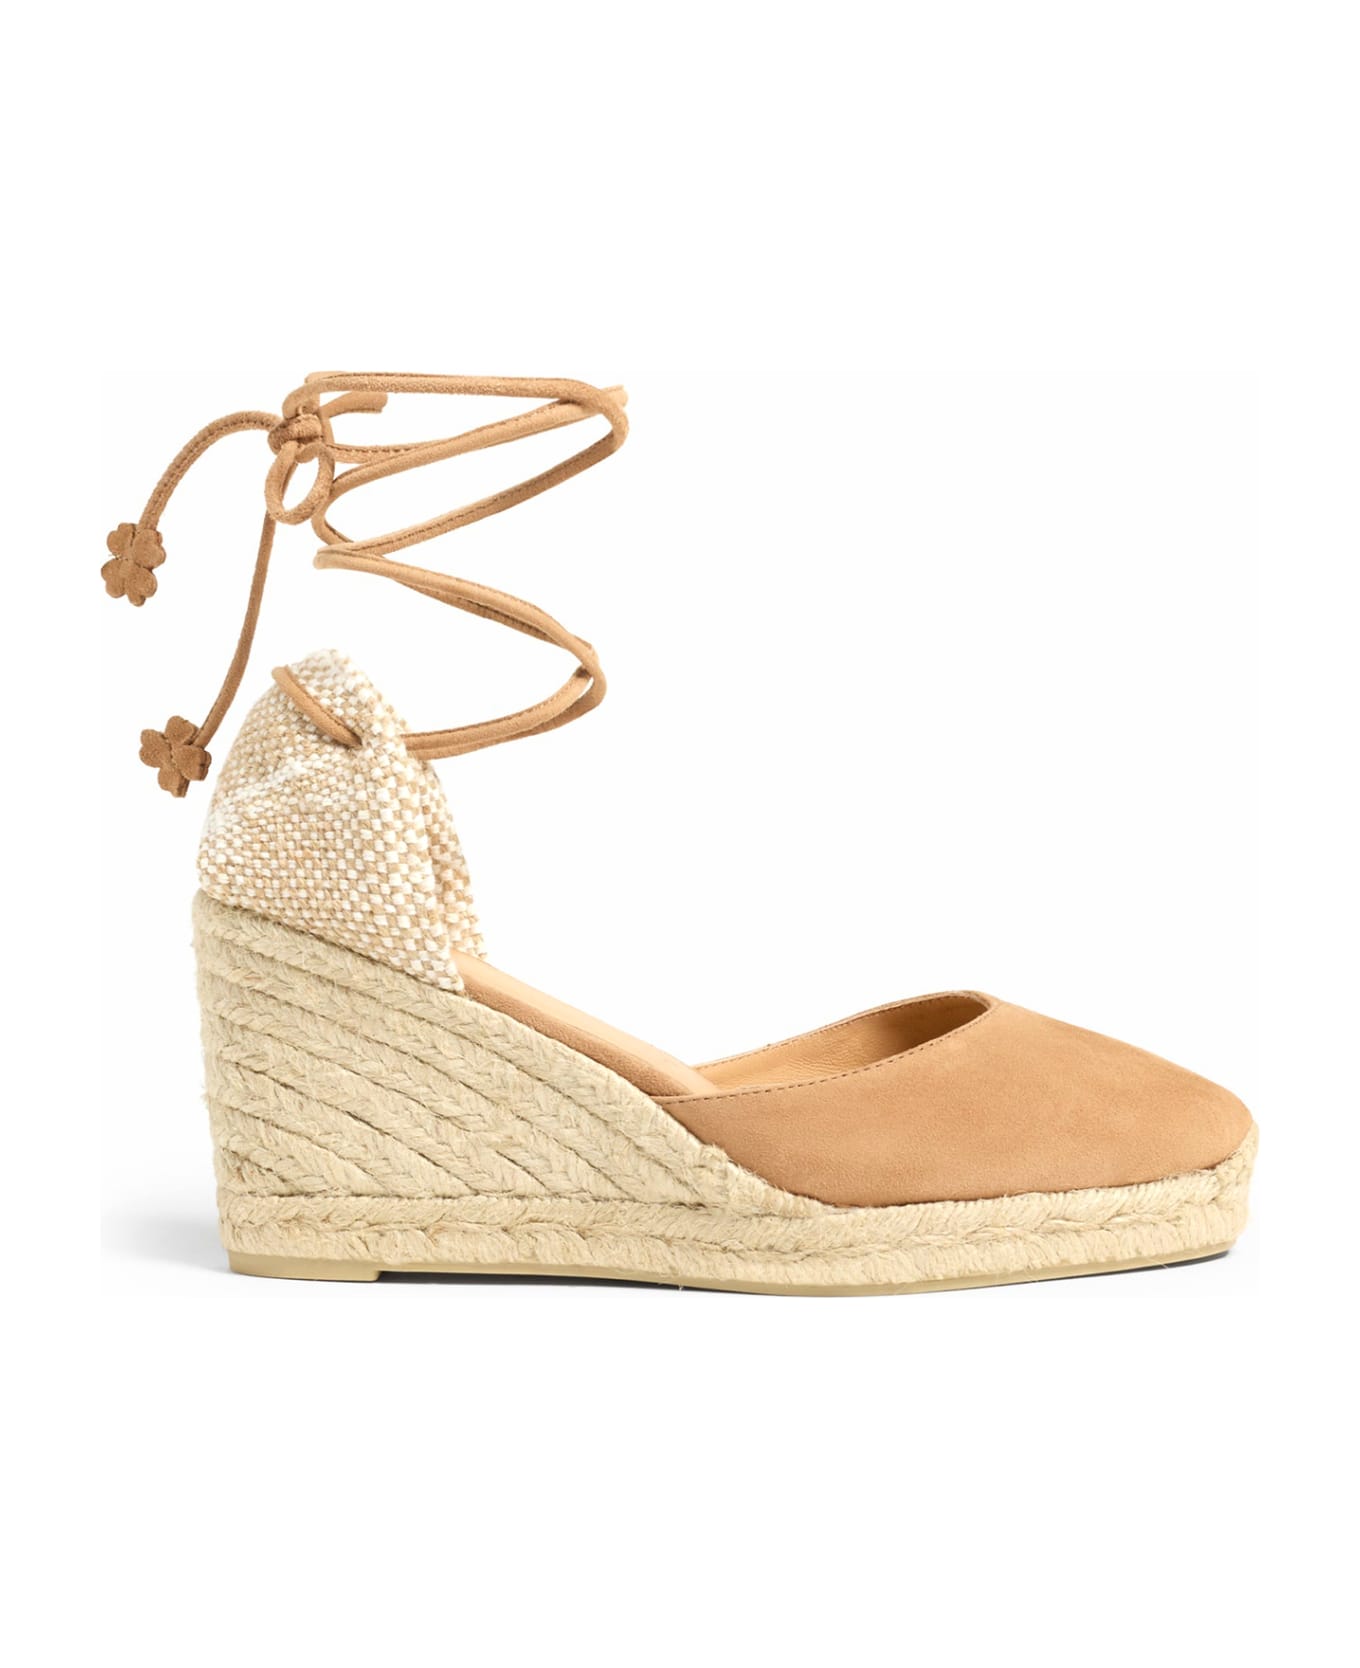 Castañer Espadrilles Carina With Wedge And Laces - TOSTADO